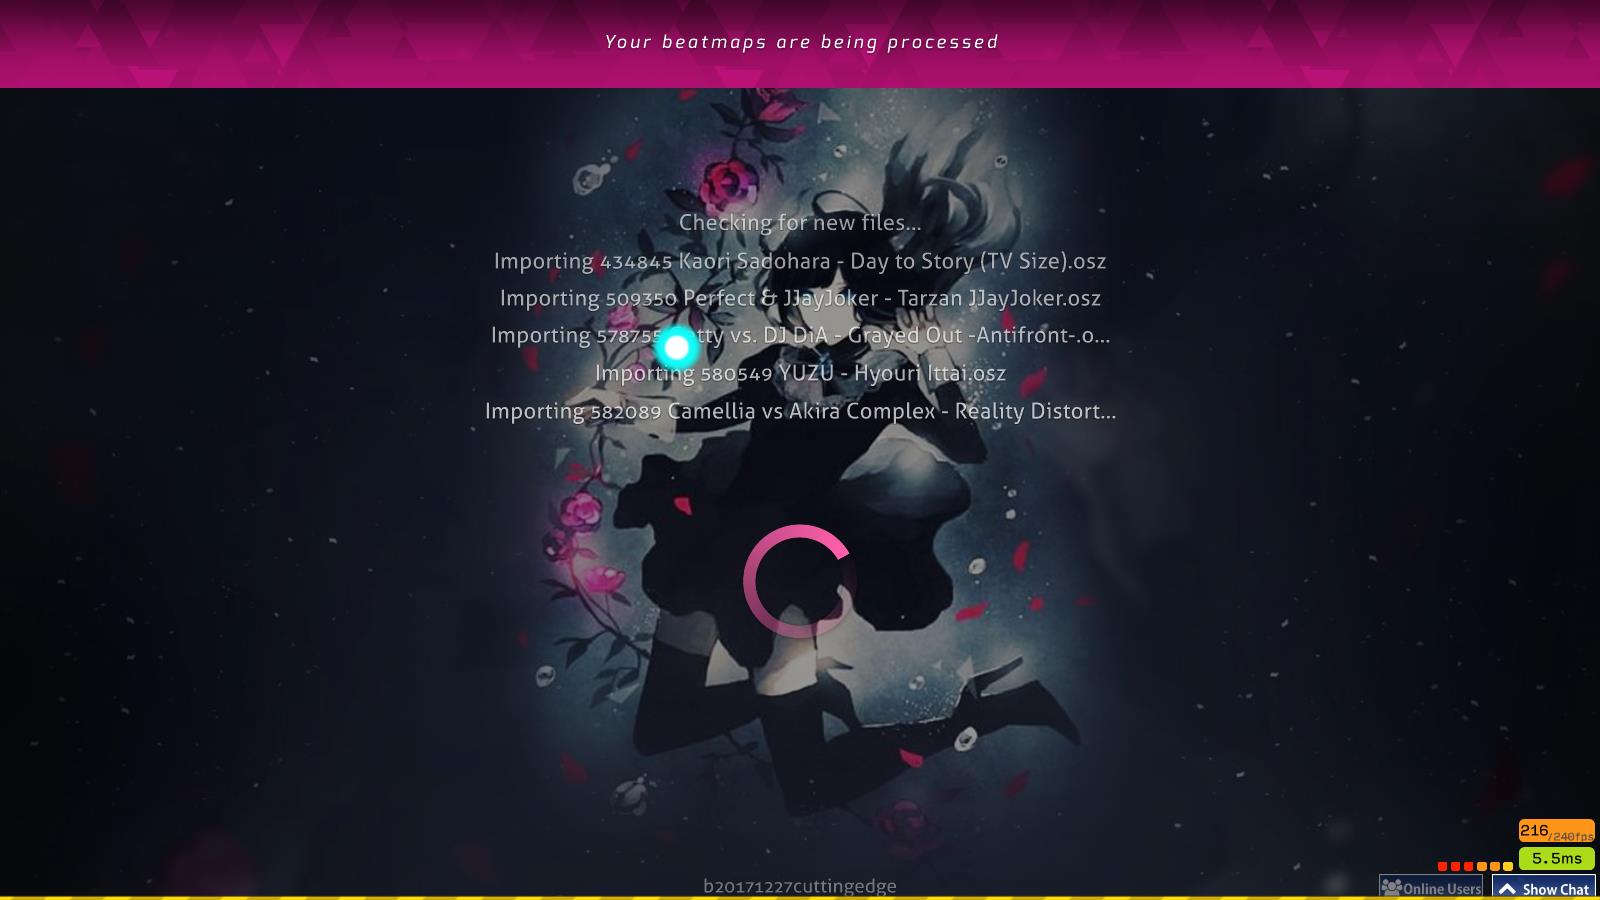 osu!-download-beatmap-from-bloodcat